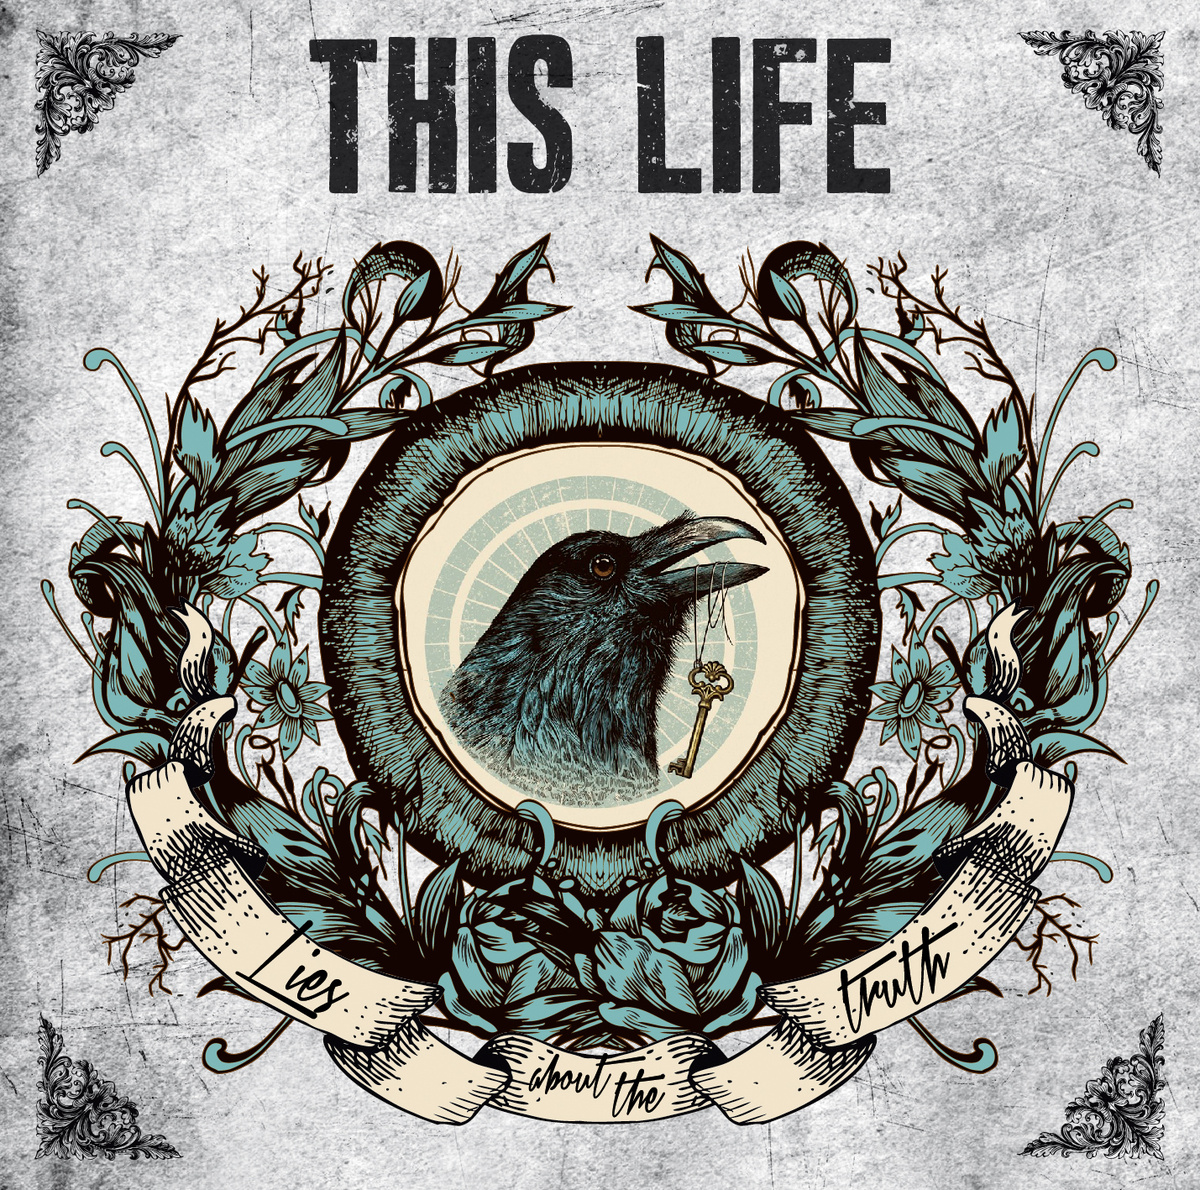 This Life – Lies about the truth